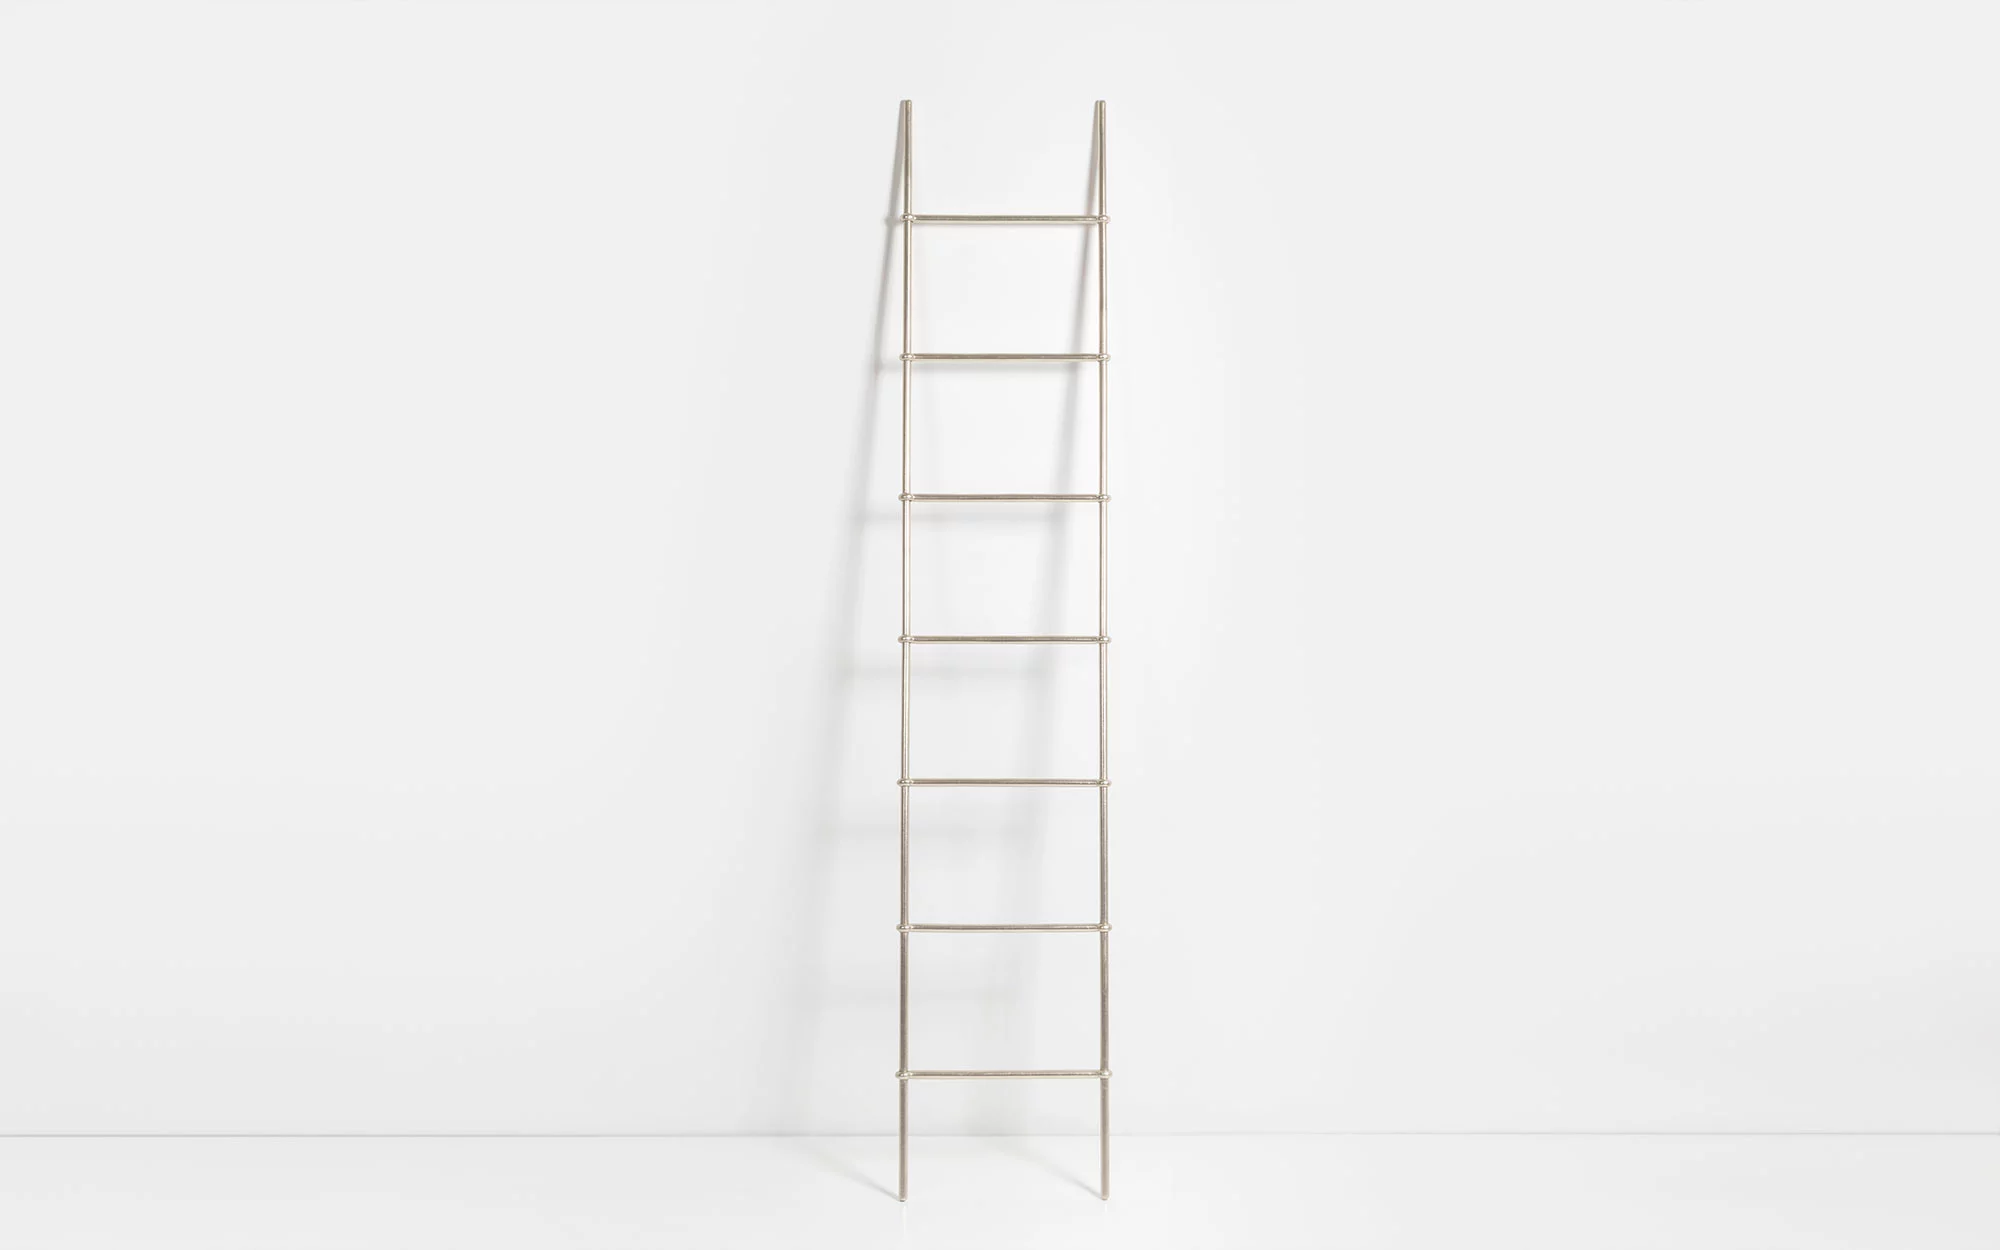 Ciel ladder - Ronan and Erwan Bouroullec - step by step.